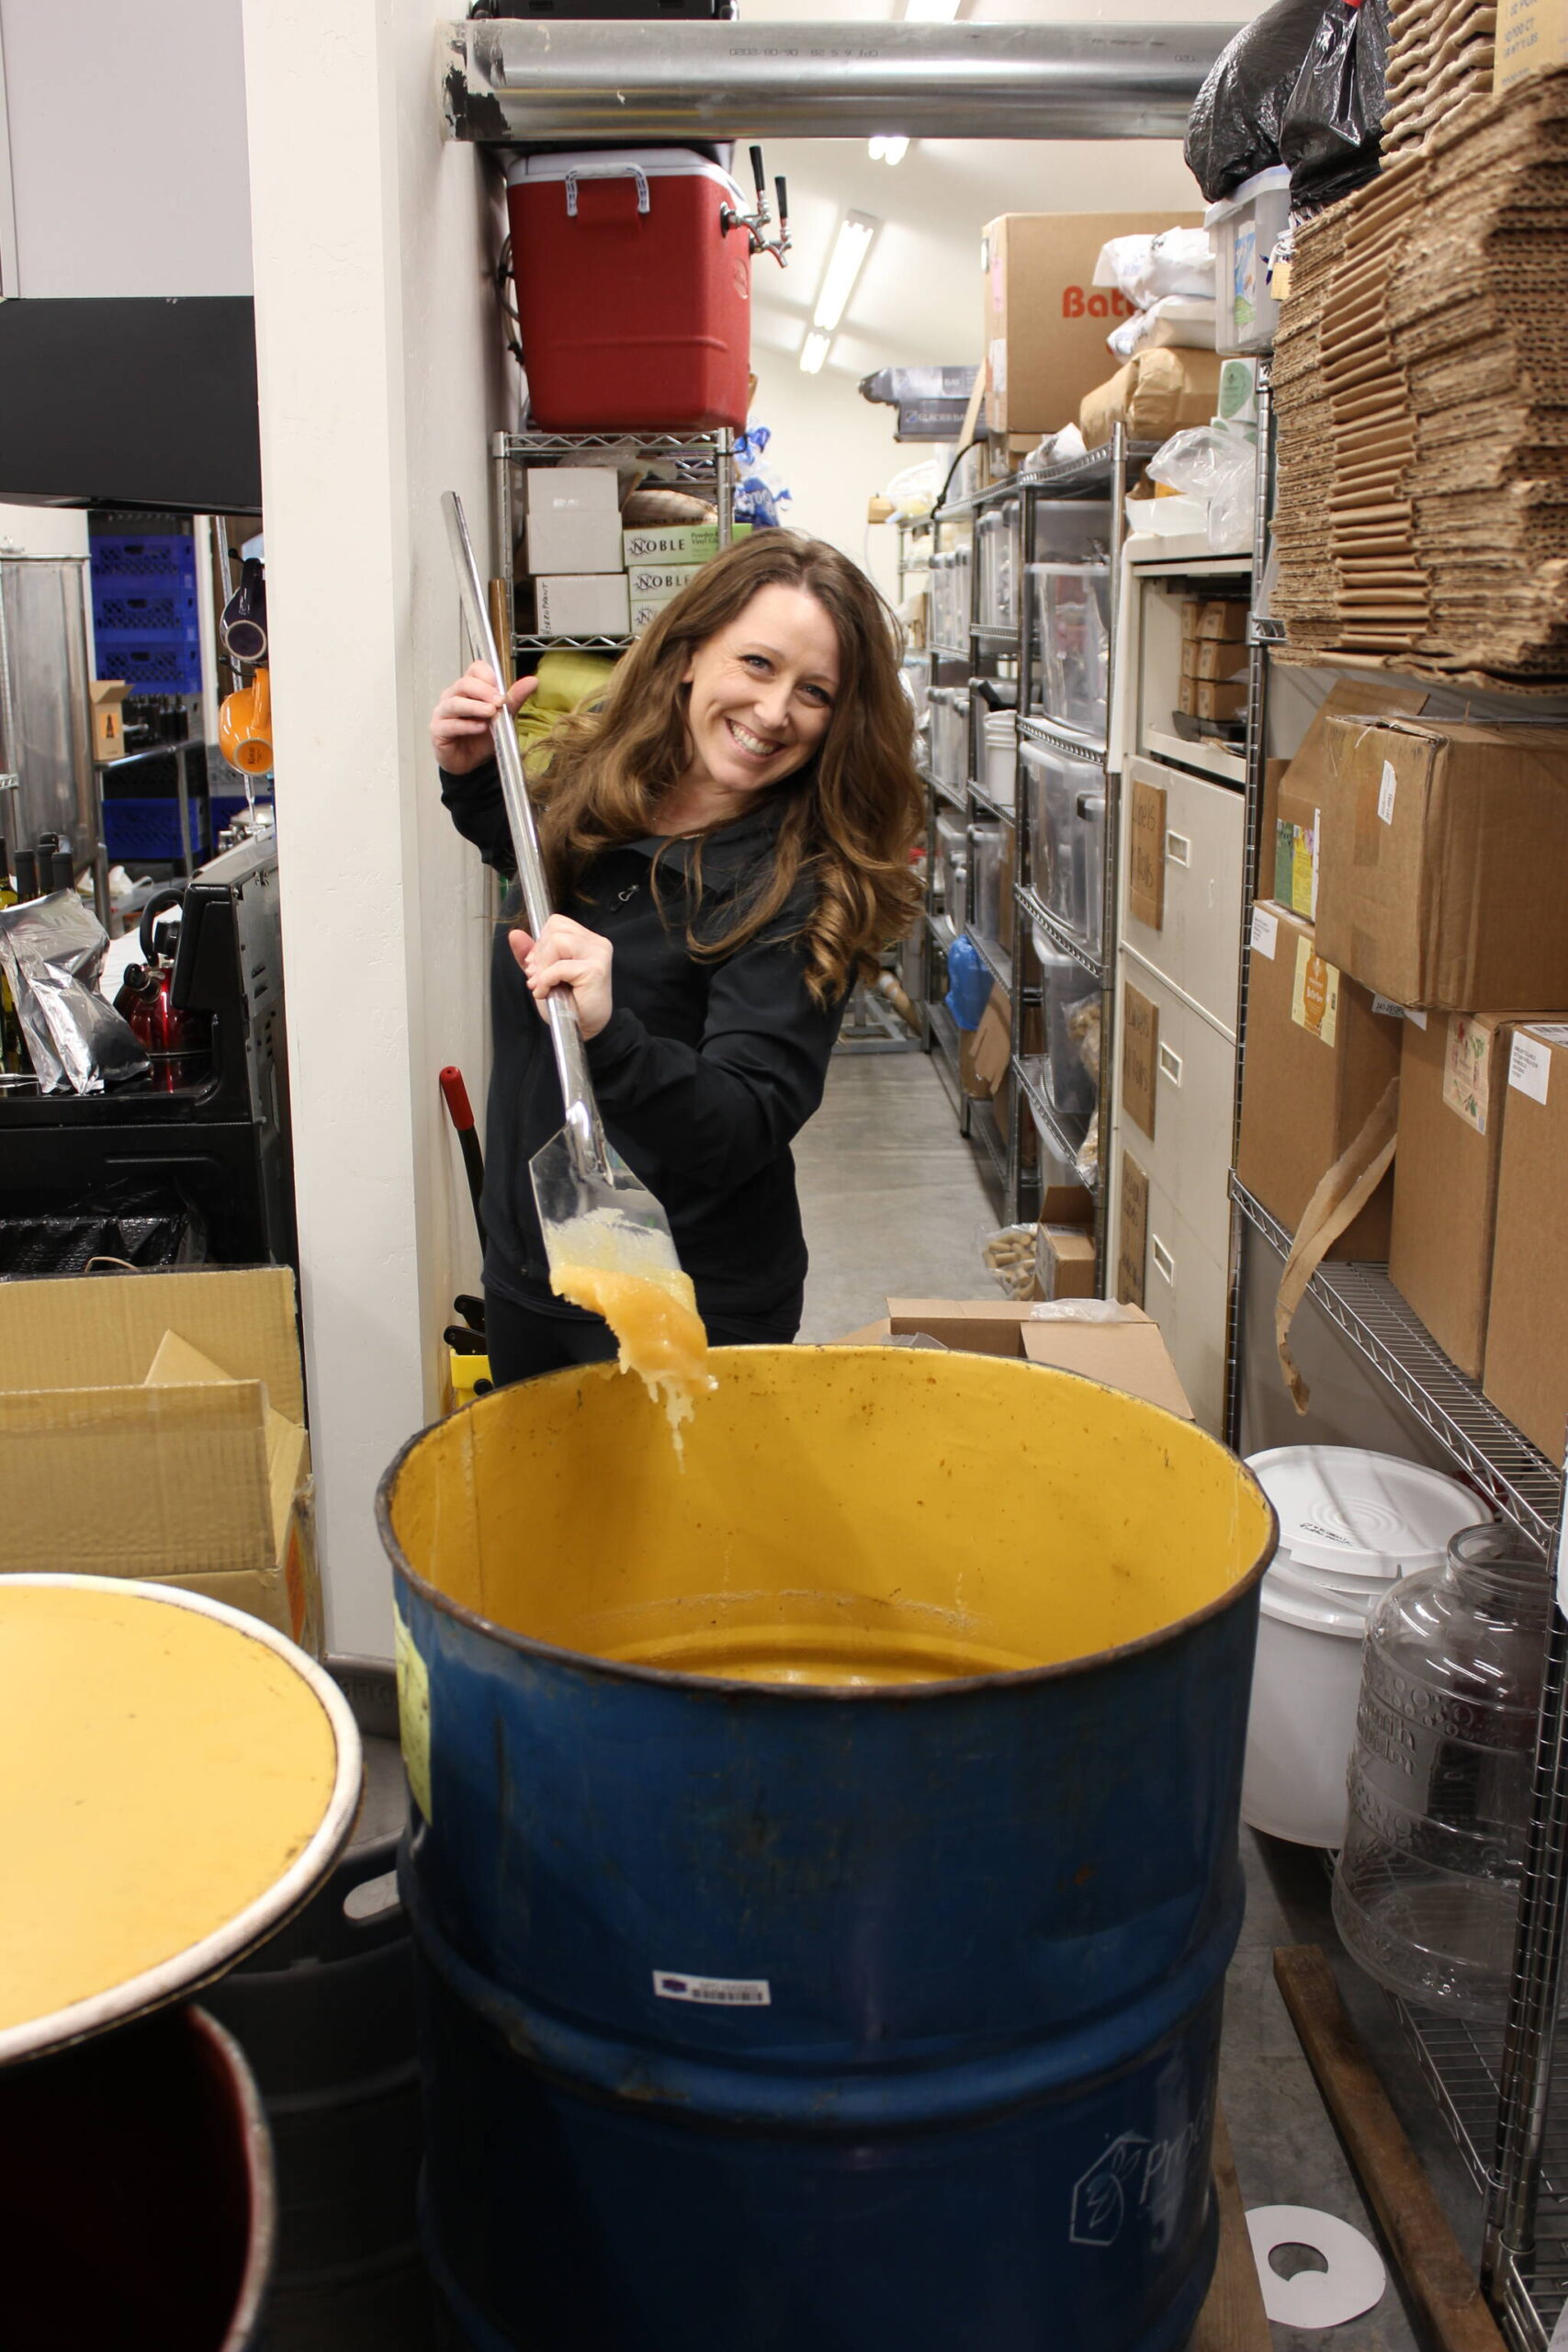 Photo provided
Michelle Scandalis scoops some honey during the mead-making process.